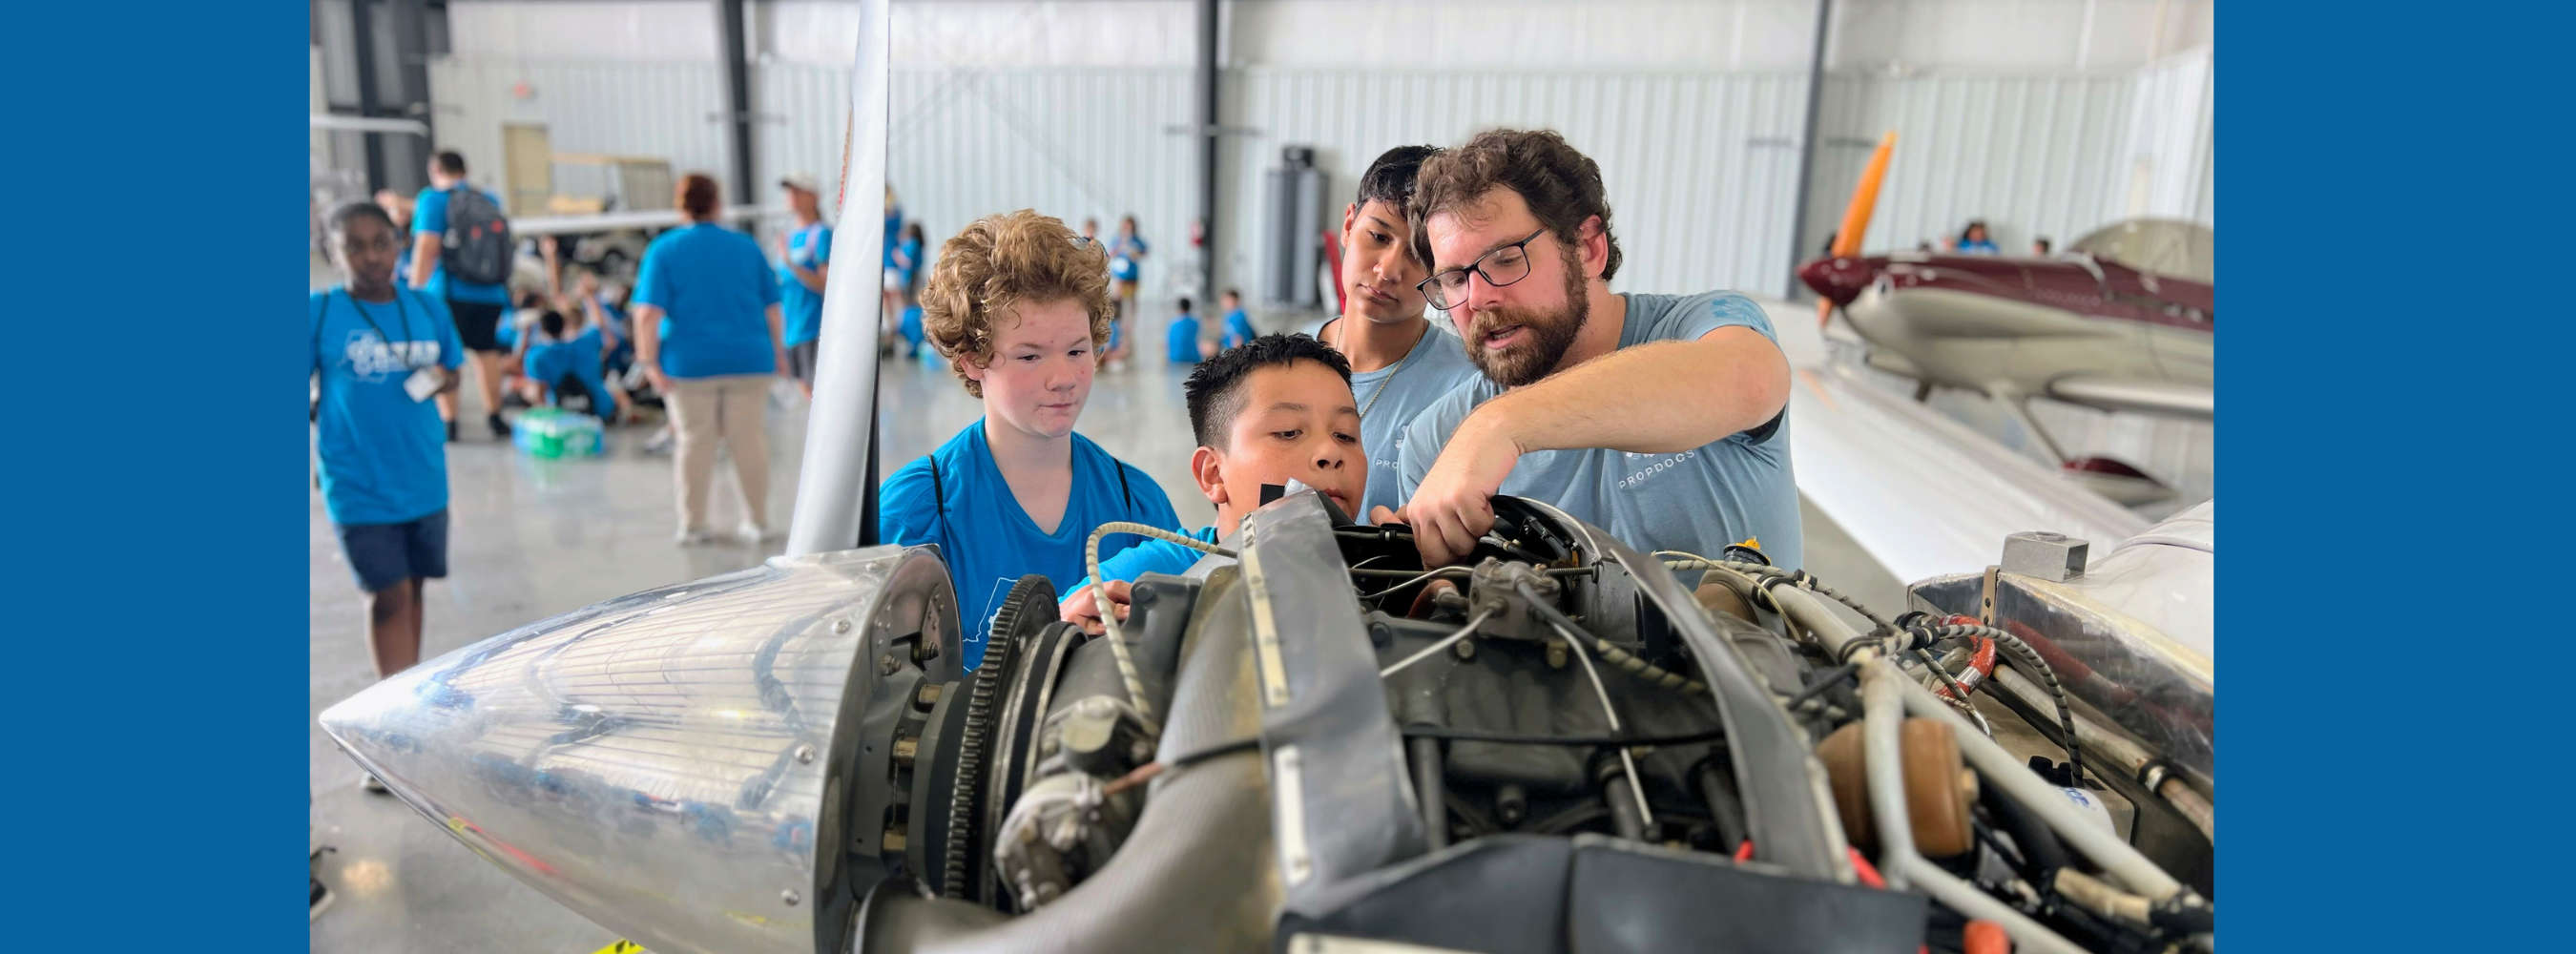 children looking at an airplane engine